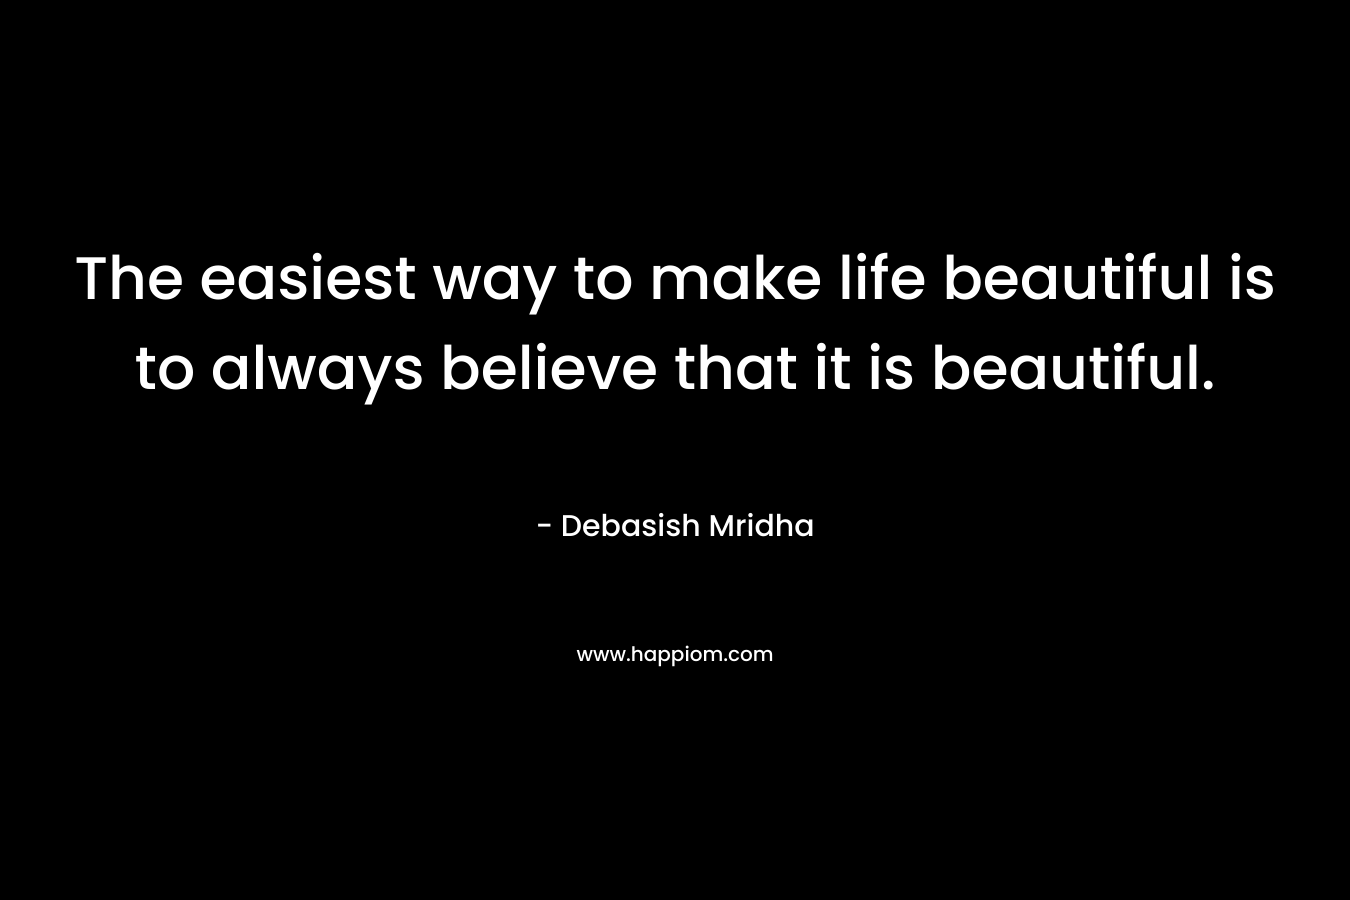 The easiest way to make life beautiful is to always believe that it is beautiful.